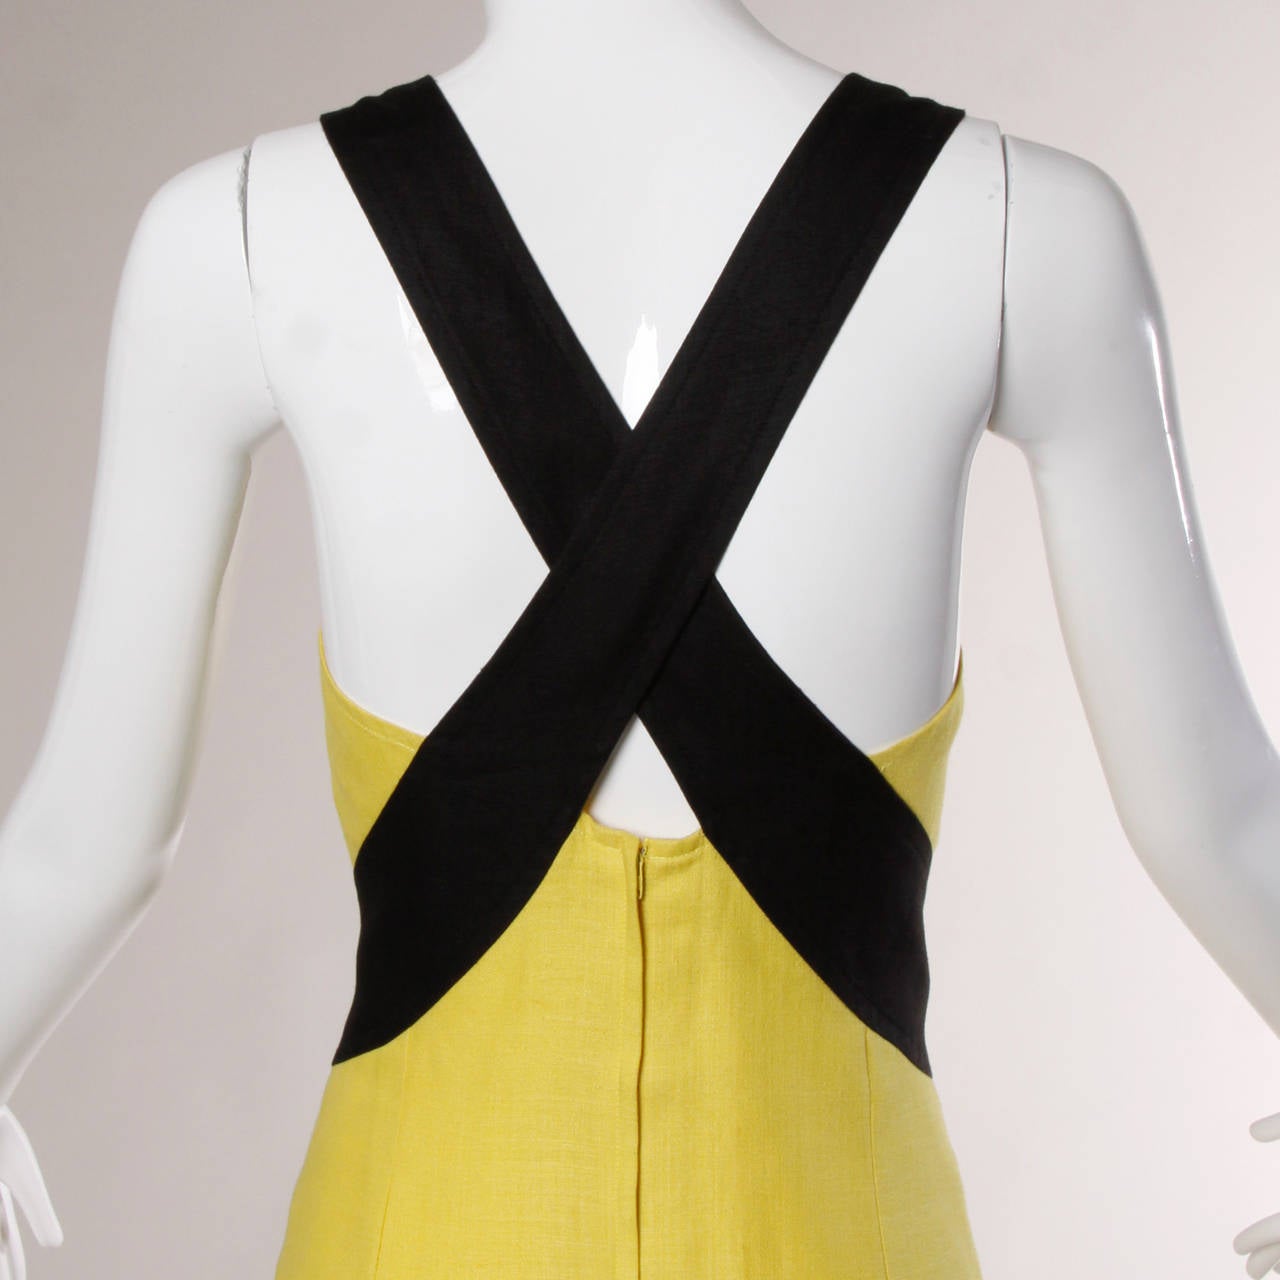 Yellow and black sheath dress with an open criss cross back by Guy Laroche.

Details

Fully Lined
Side Pockets
Back Zip Closure
Circa: 1980s
Estimated Size: M
Colors: Black / Yellow
Fabric: Linen
Label: Guy Laroche